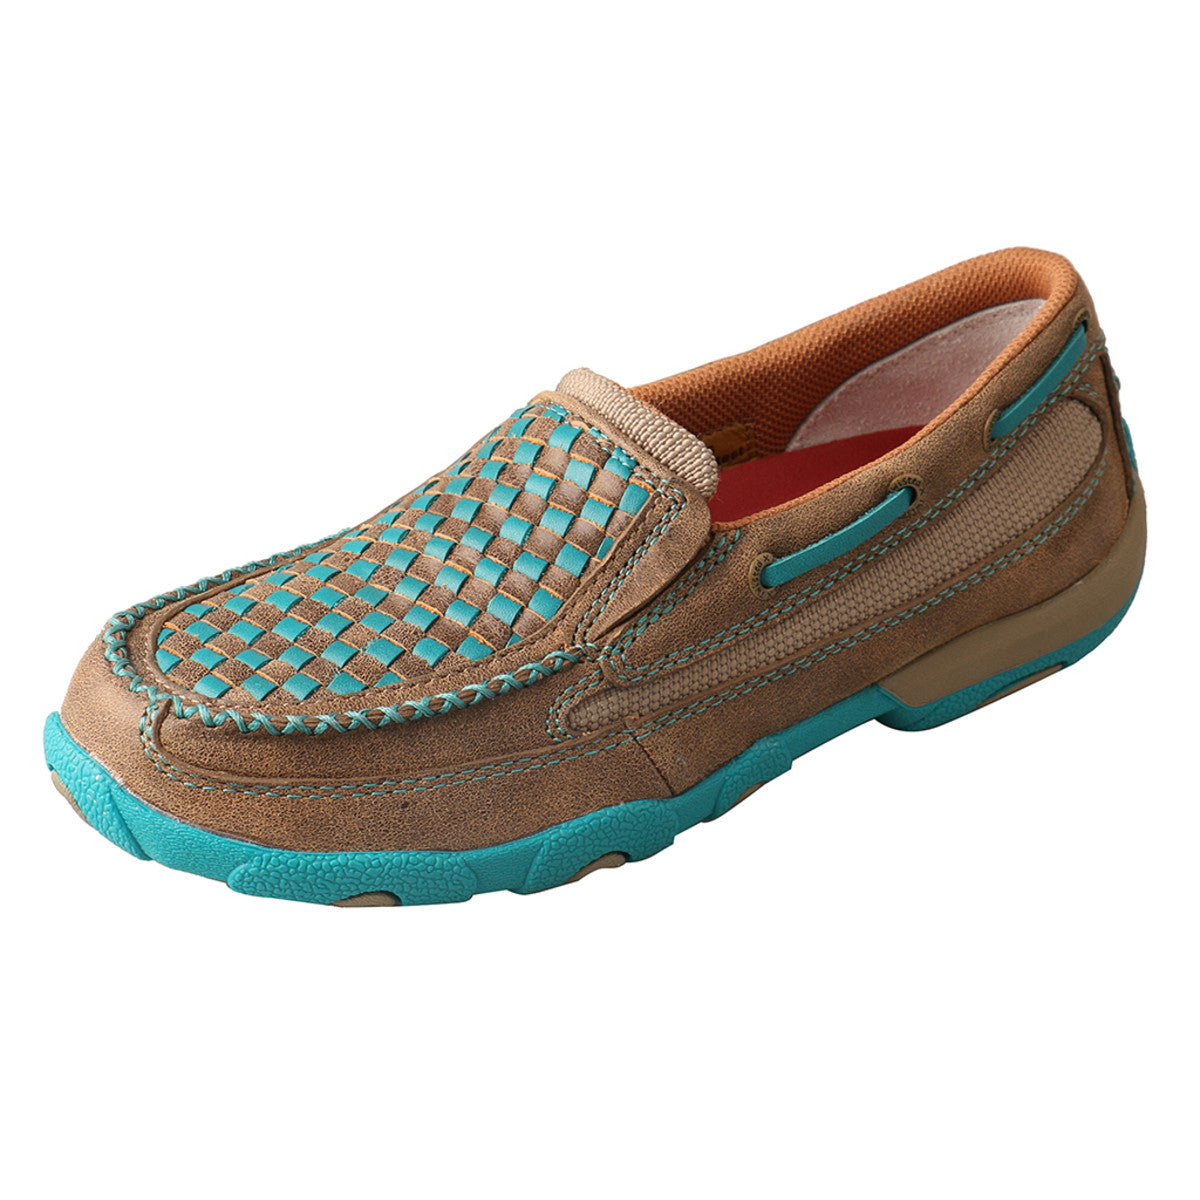 Women's Twisted X Slip-On Driving Moccasins Shoe in Bomber & Turquoise from the side view